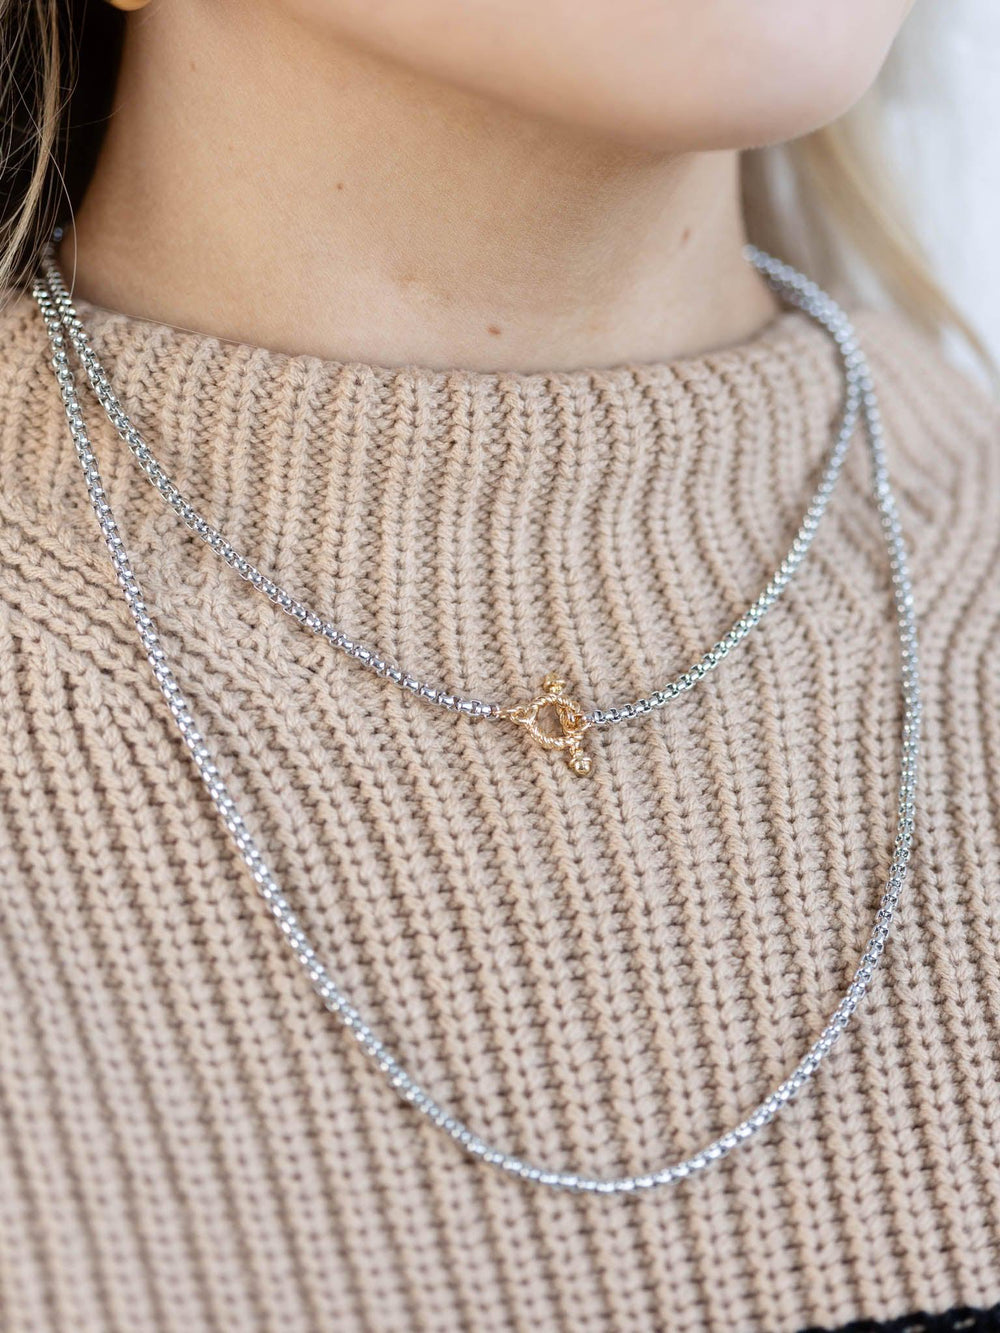 New Prospects-Long Toggle Chain Necklace - Leela and Lavender